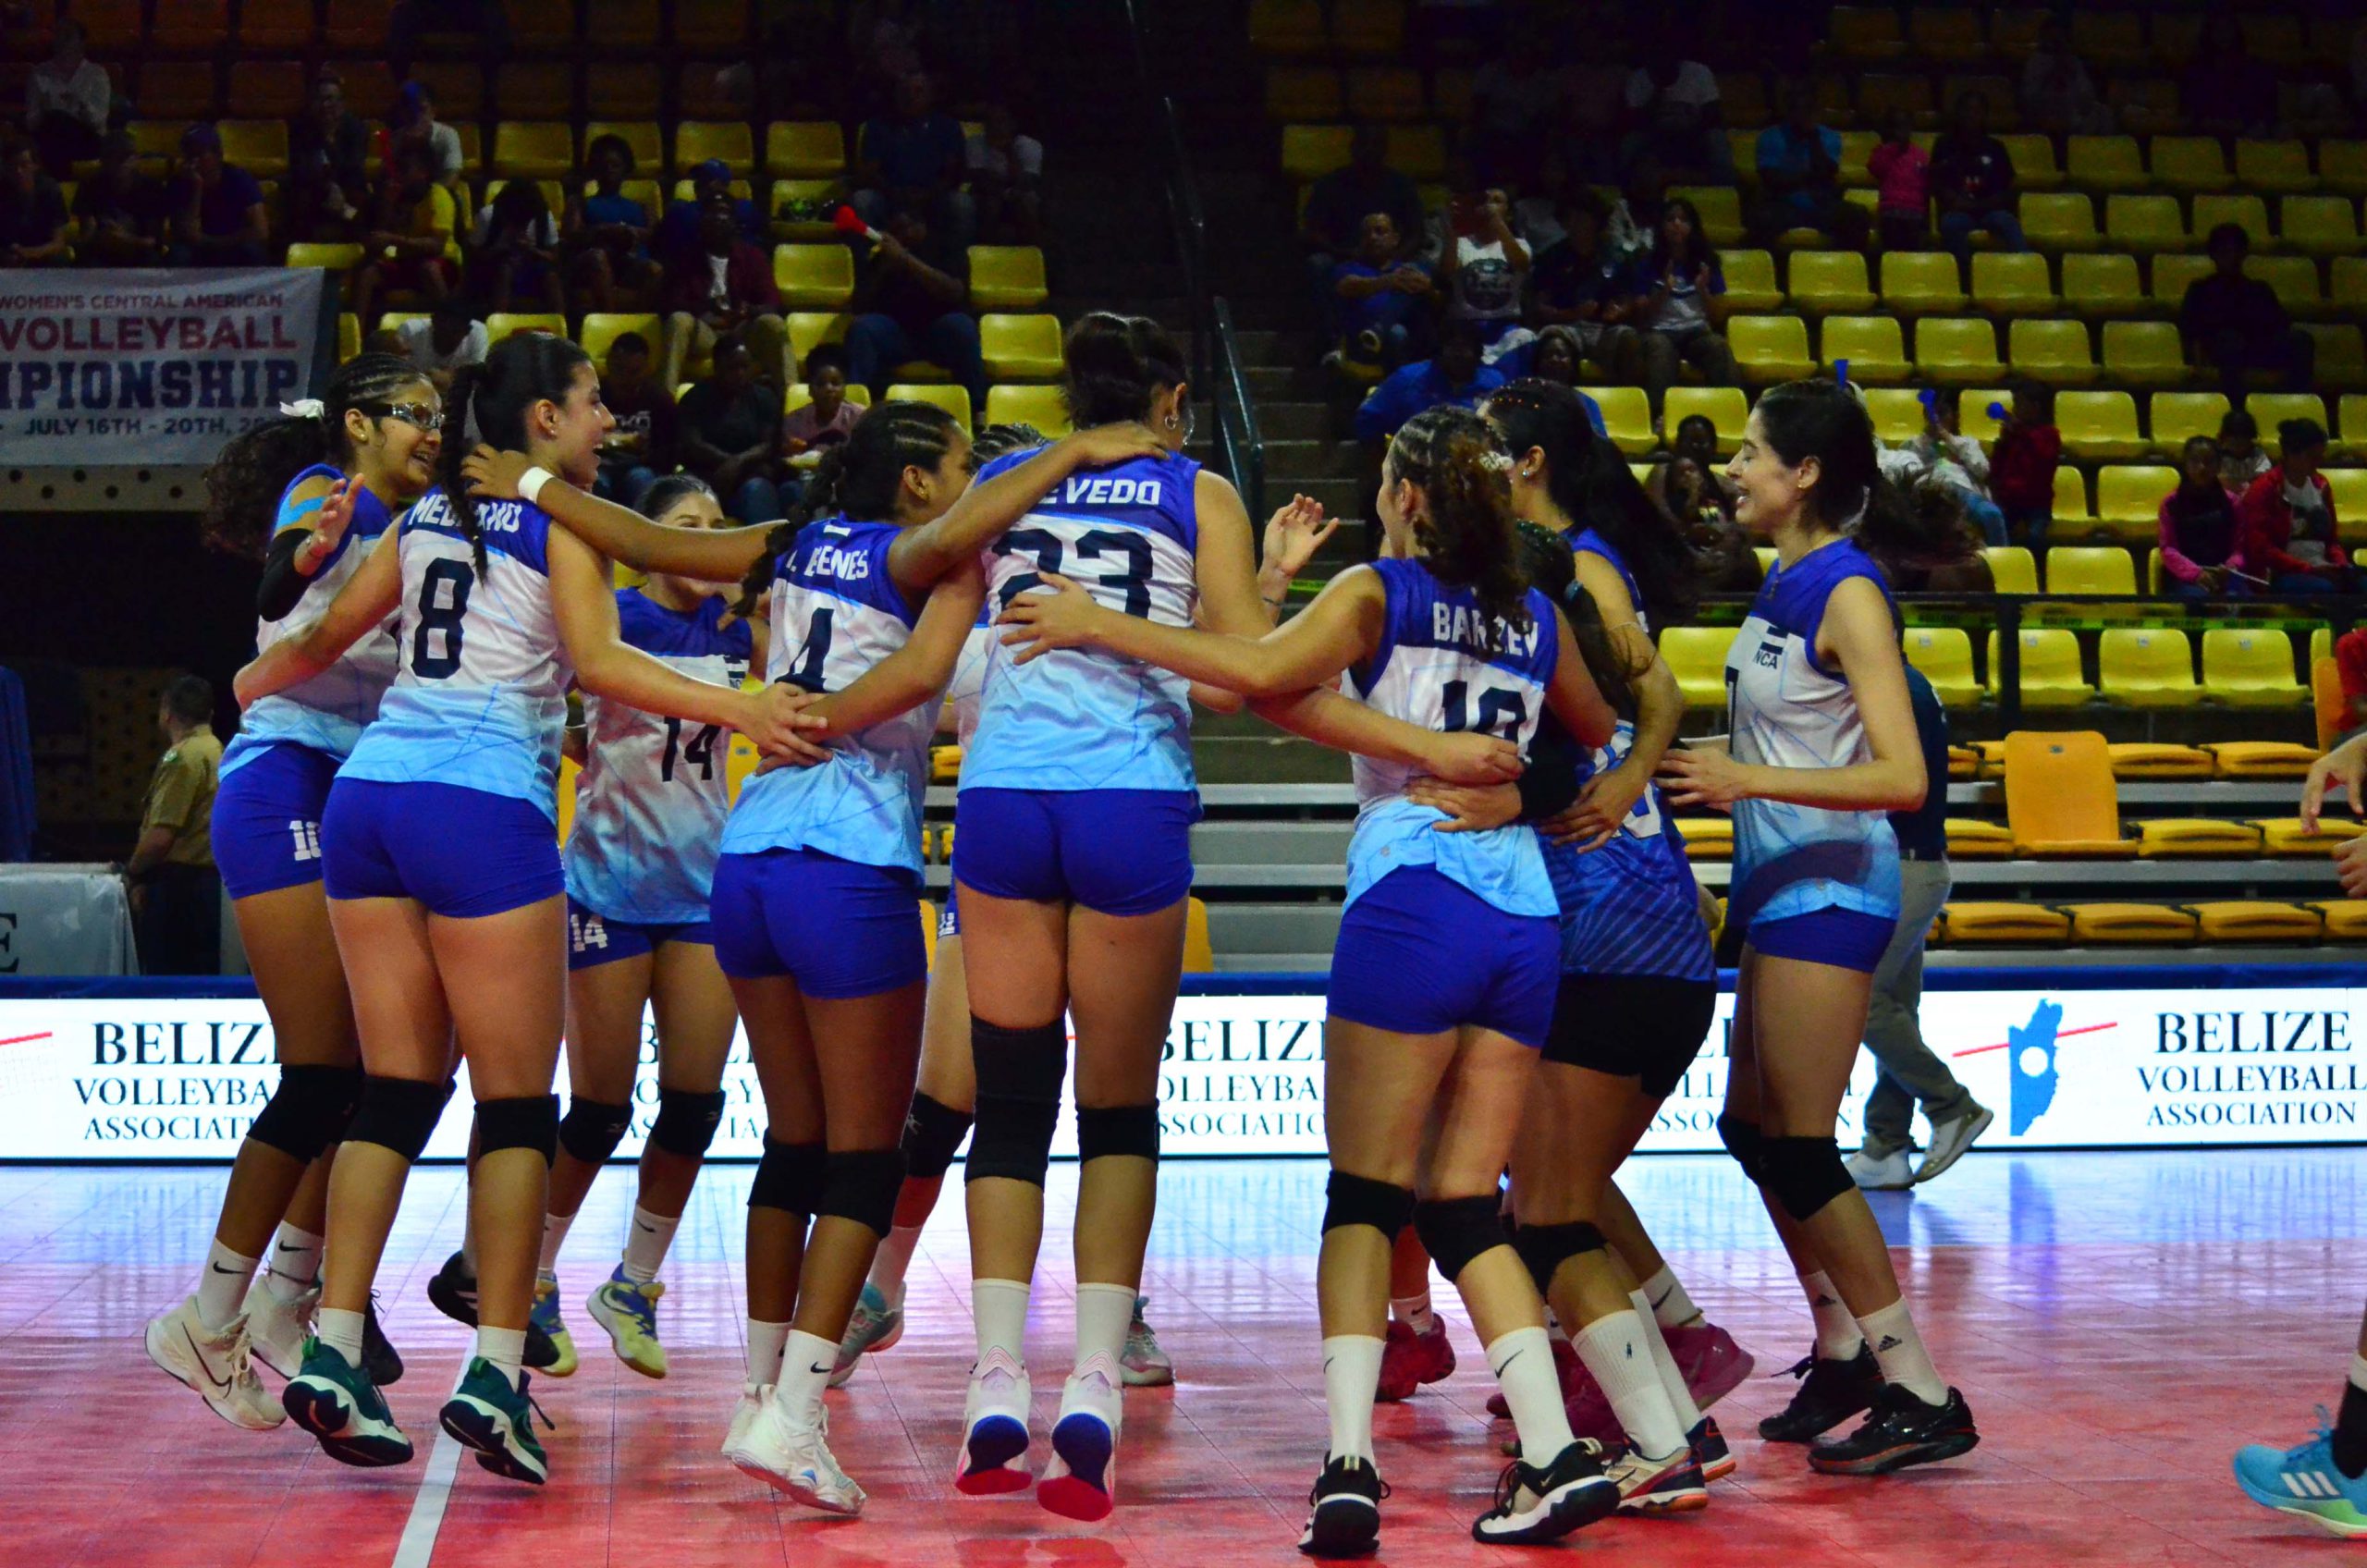 Nicaragua ends the 20th Central American U21 Women’s Championship with a Win, Awaiting Medal Color